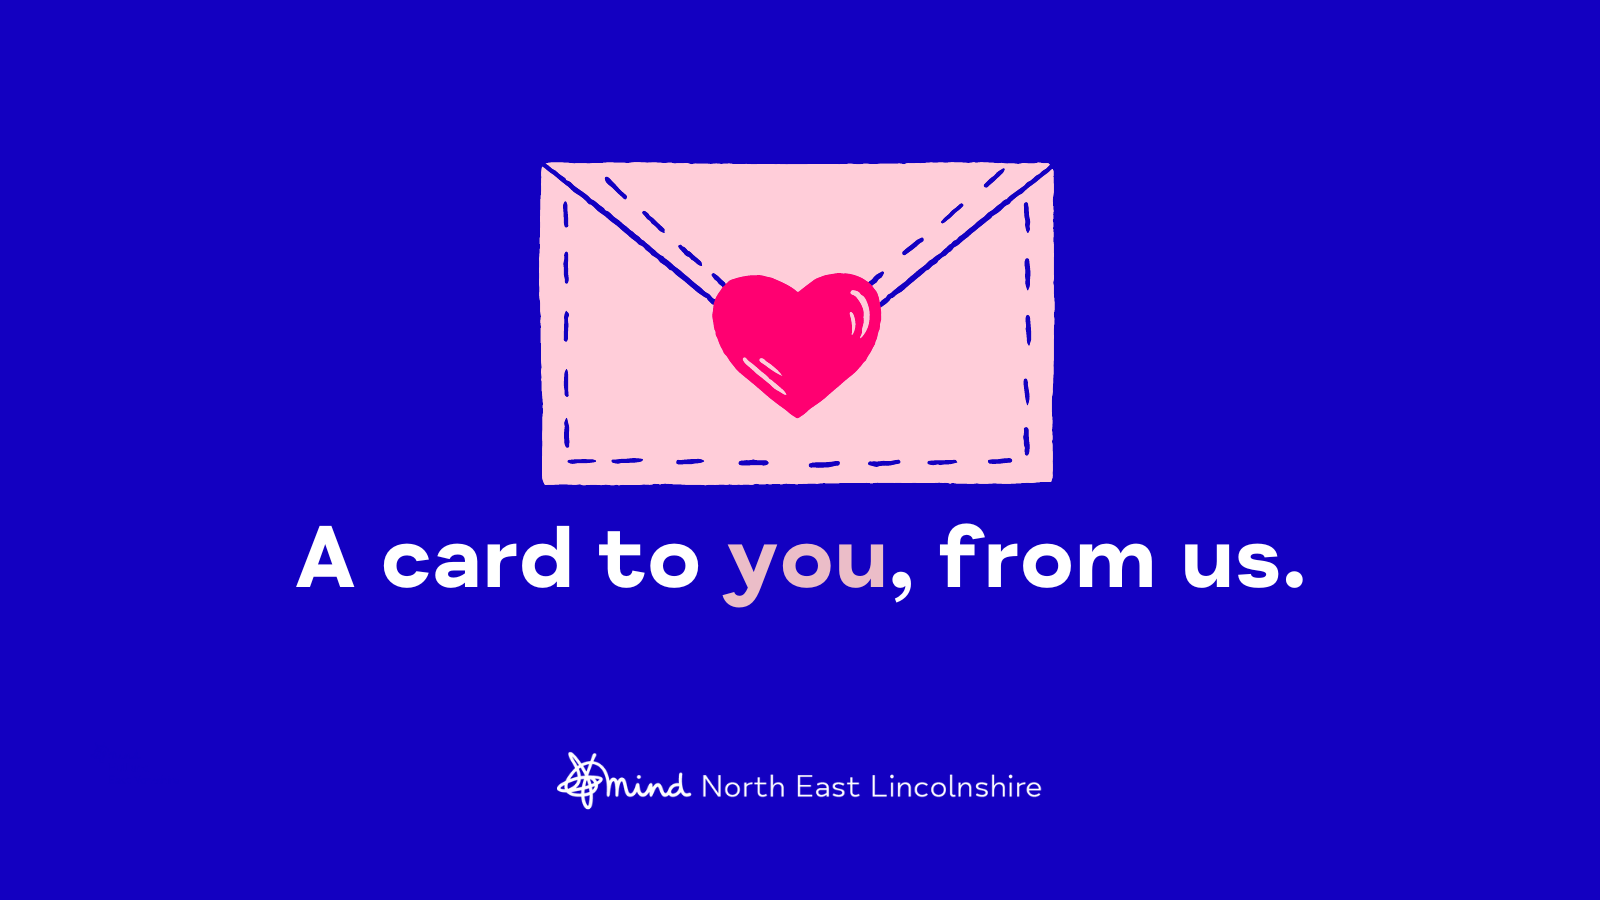 A card from us, to you